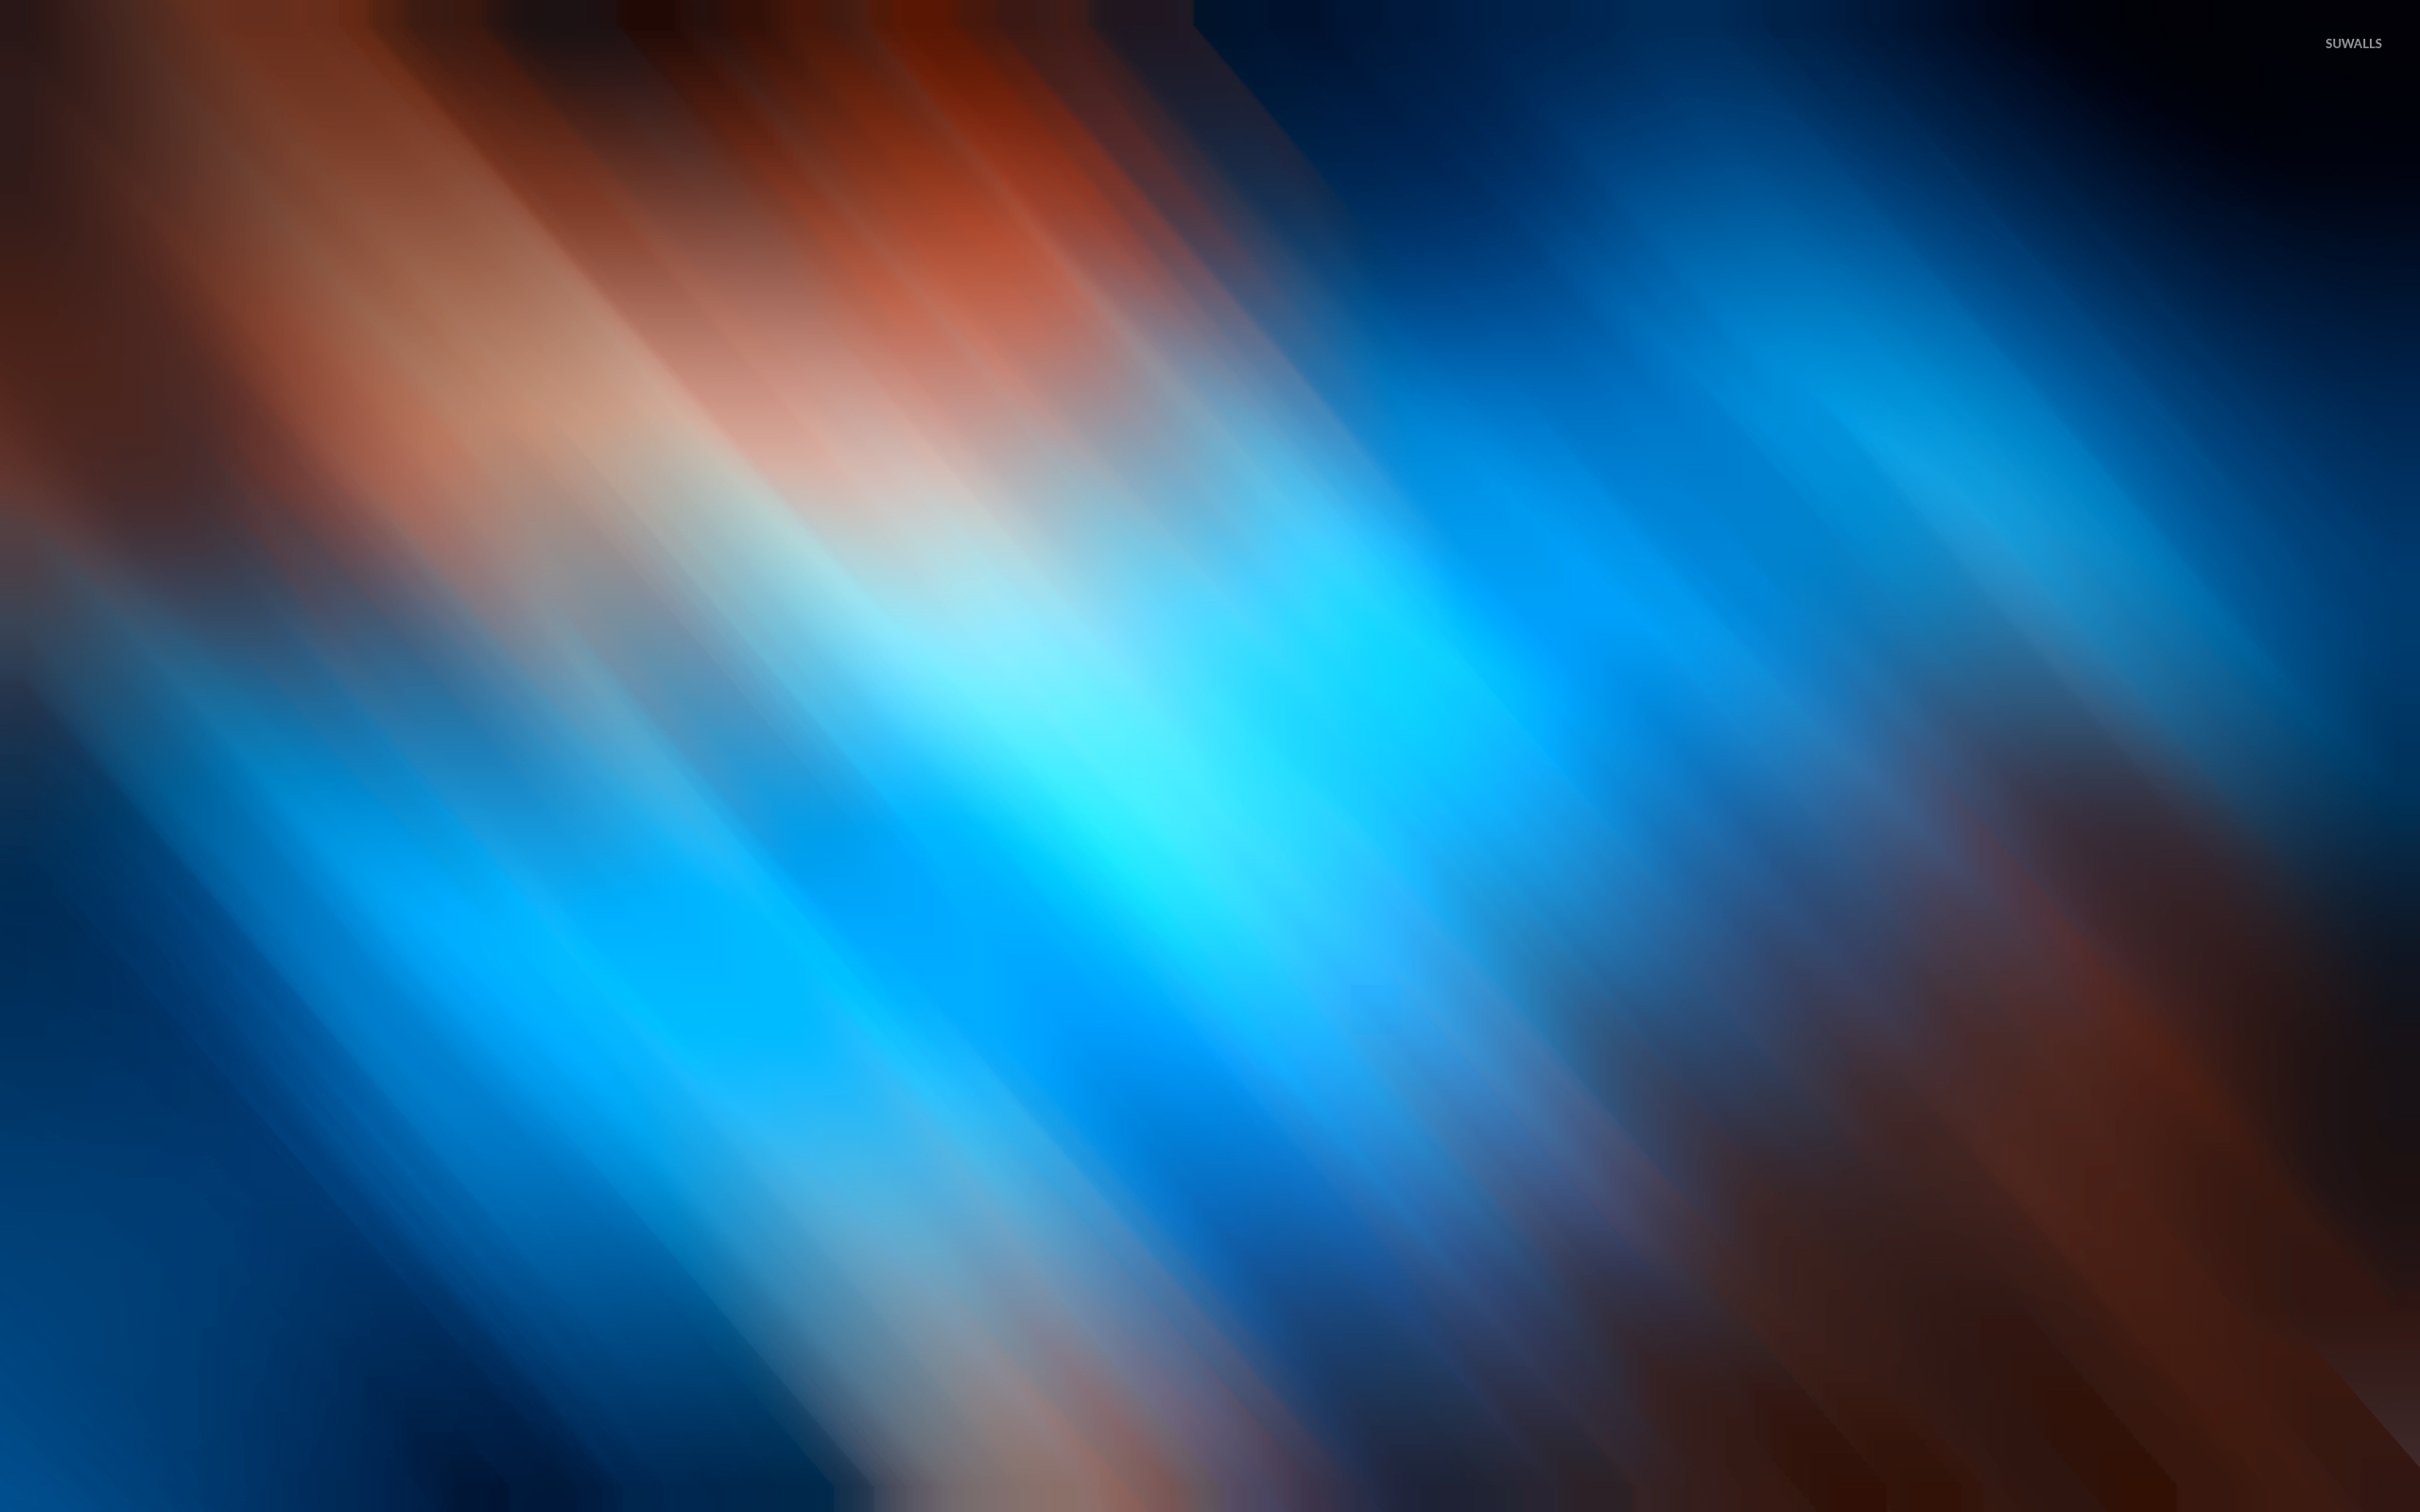 Red blur pressing on the blue one wallpaper - Minimalistic ...